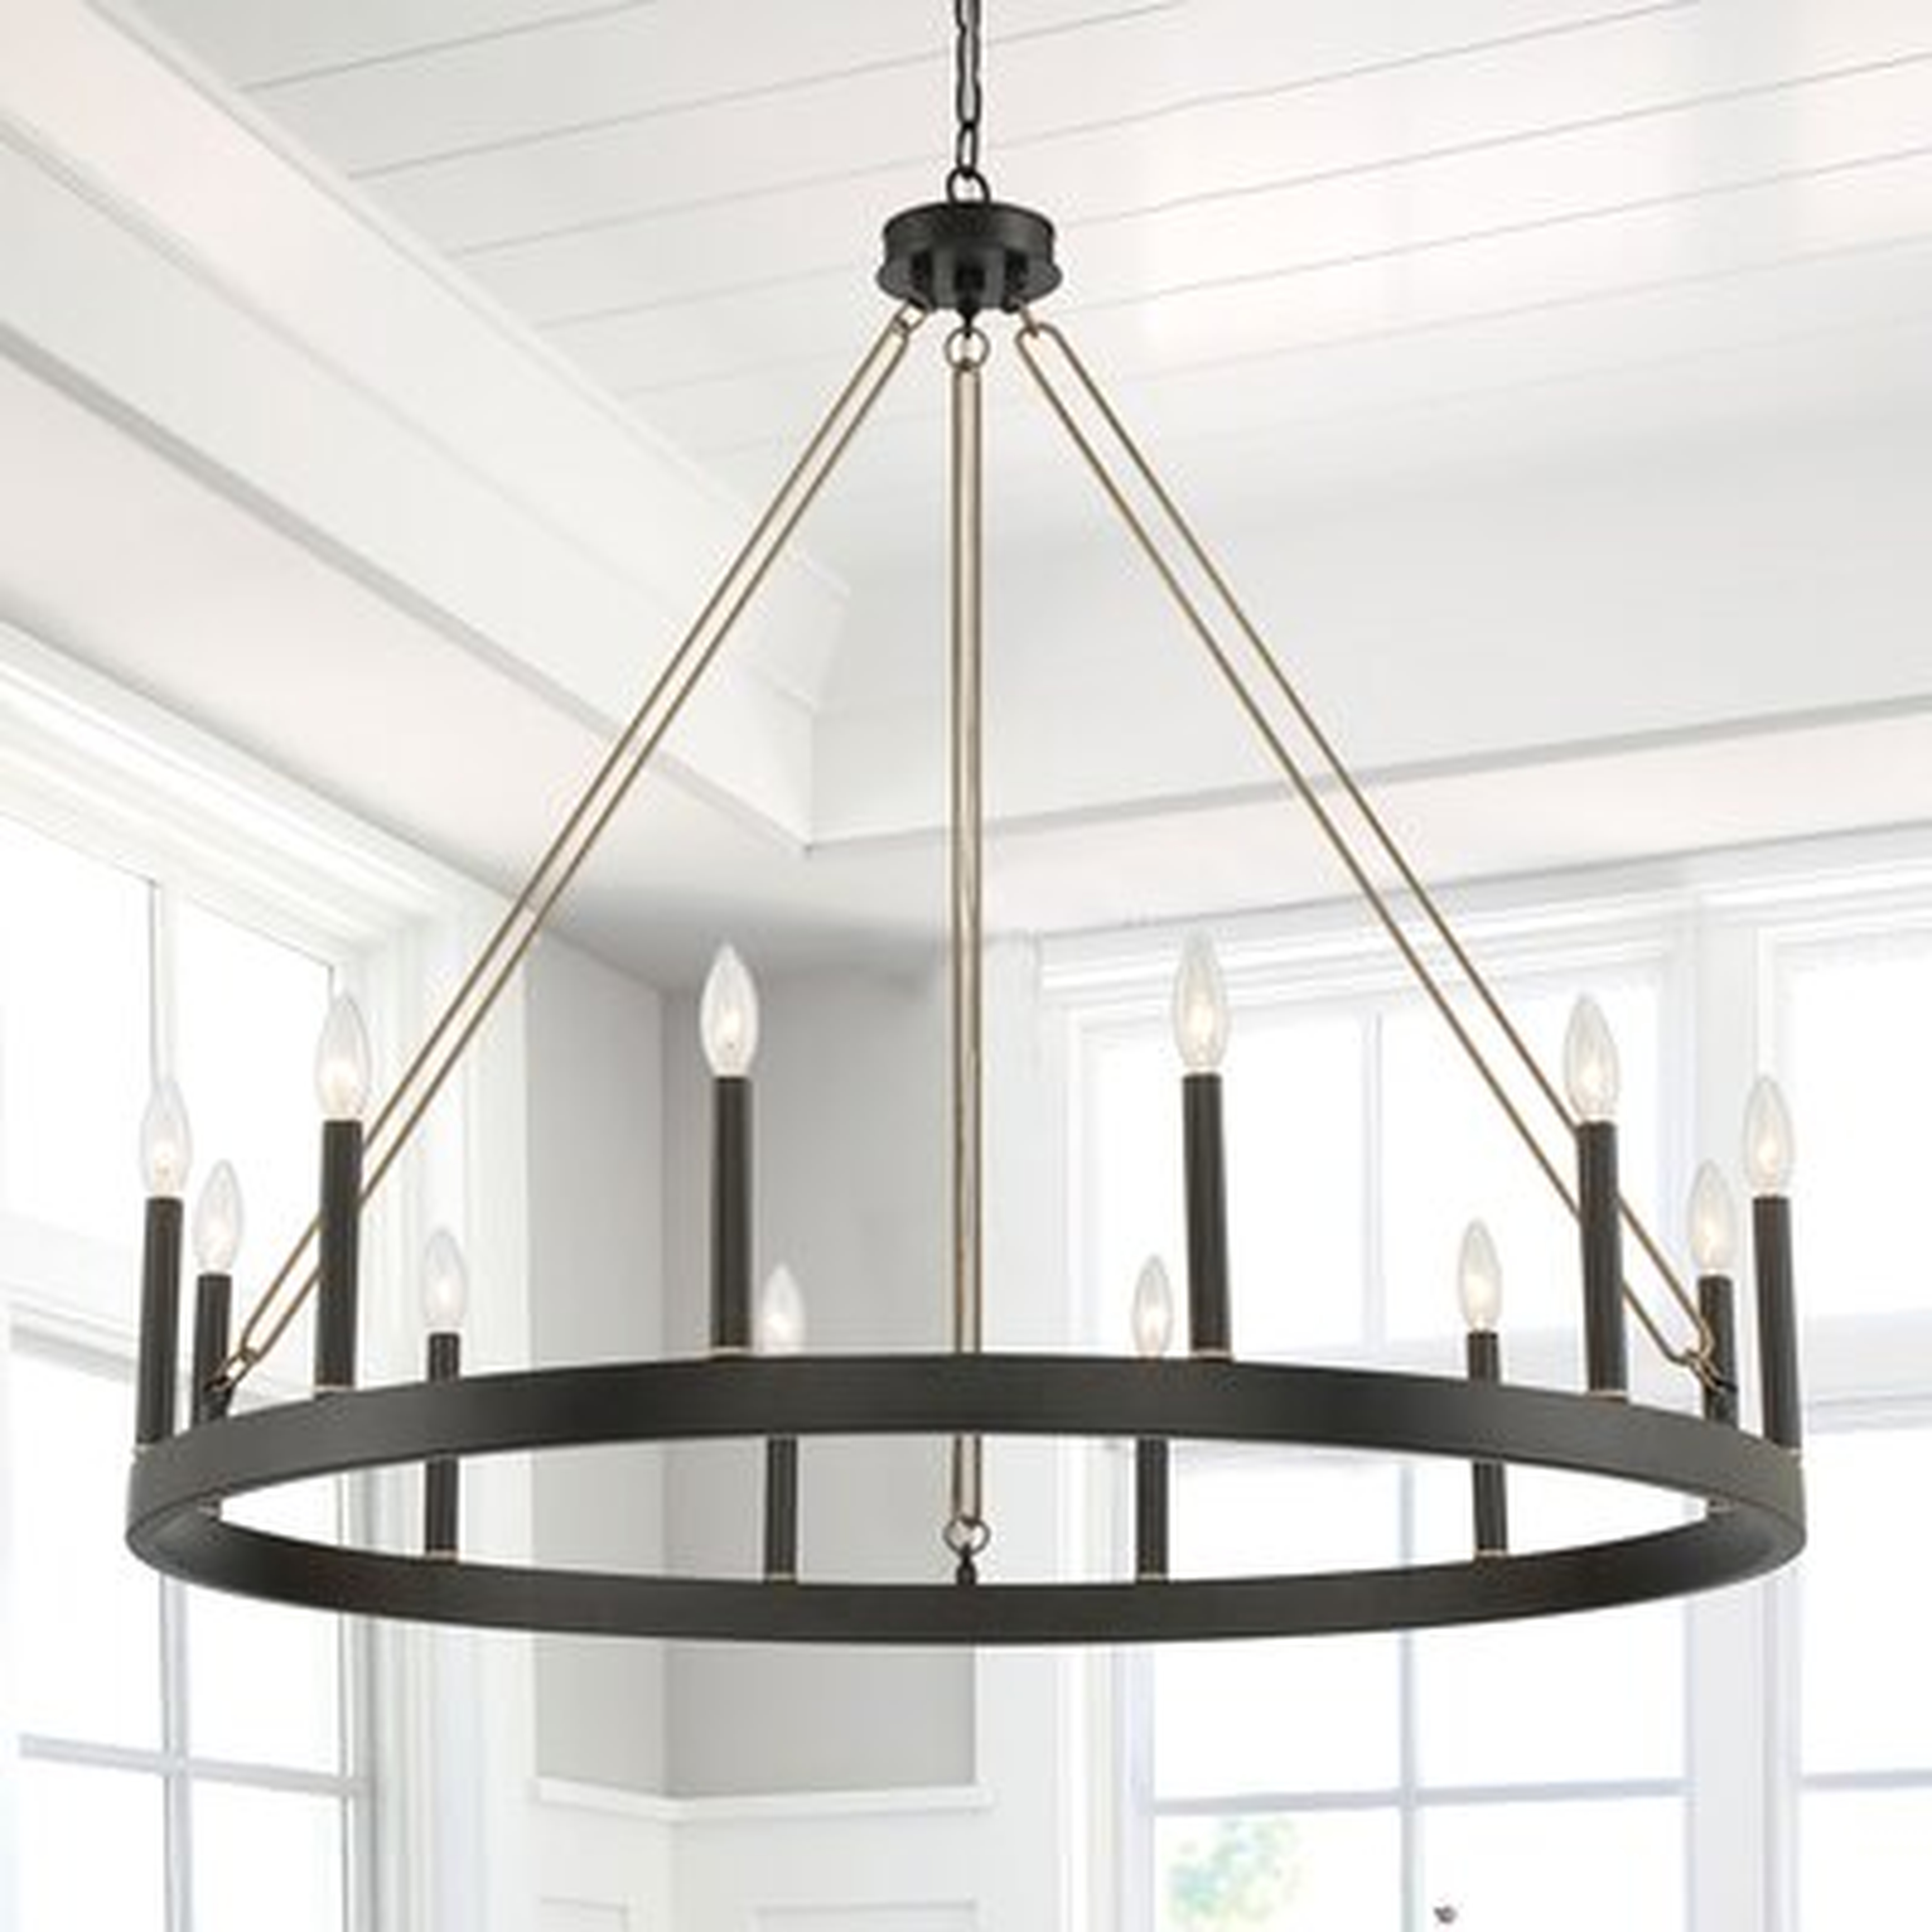 Arwood 12 - Light Candle Style Wagon Wheel Chandelier with Wood Accents - Wayfair